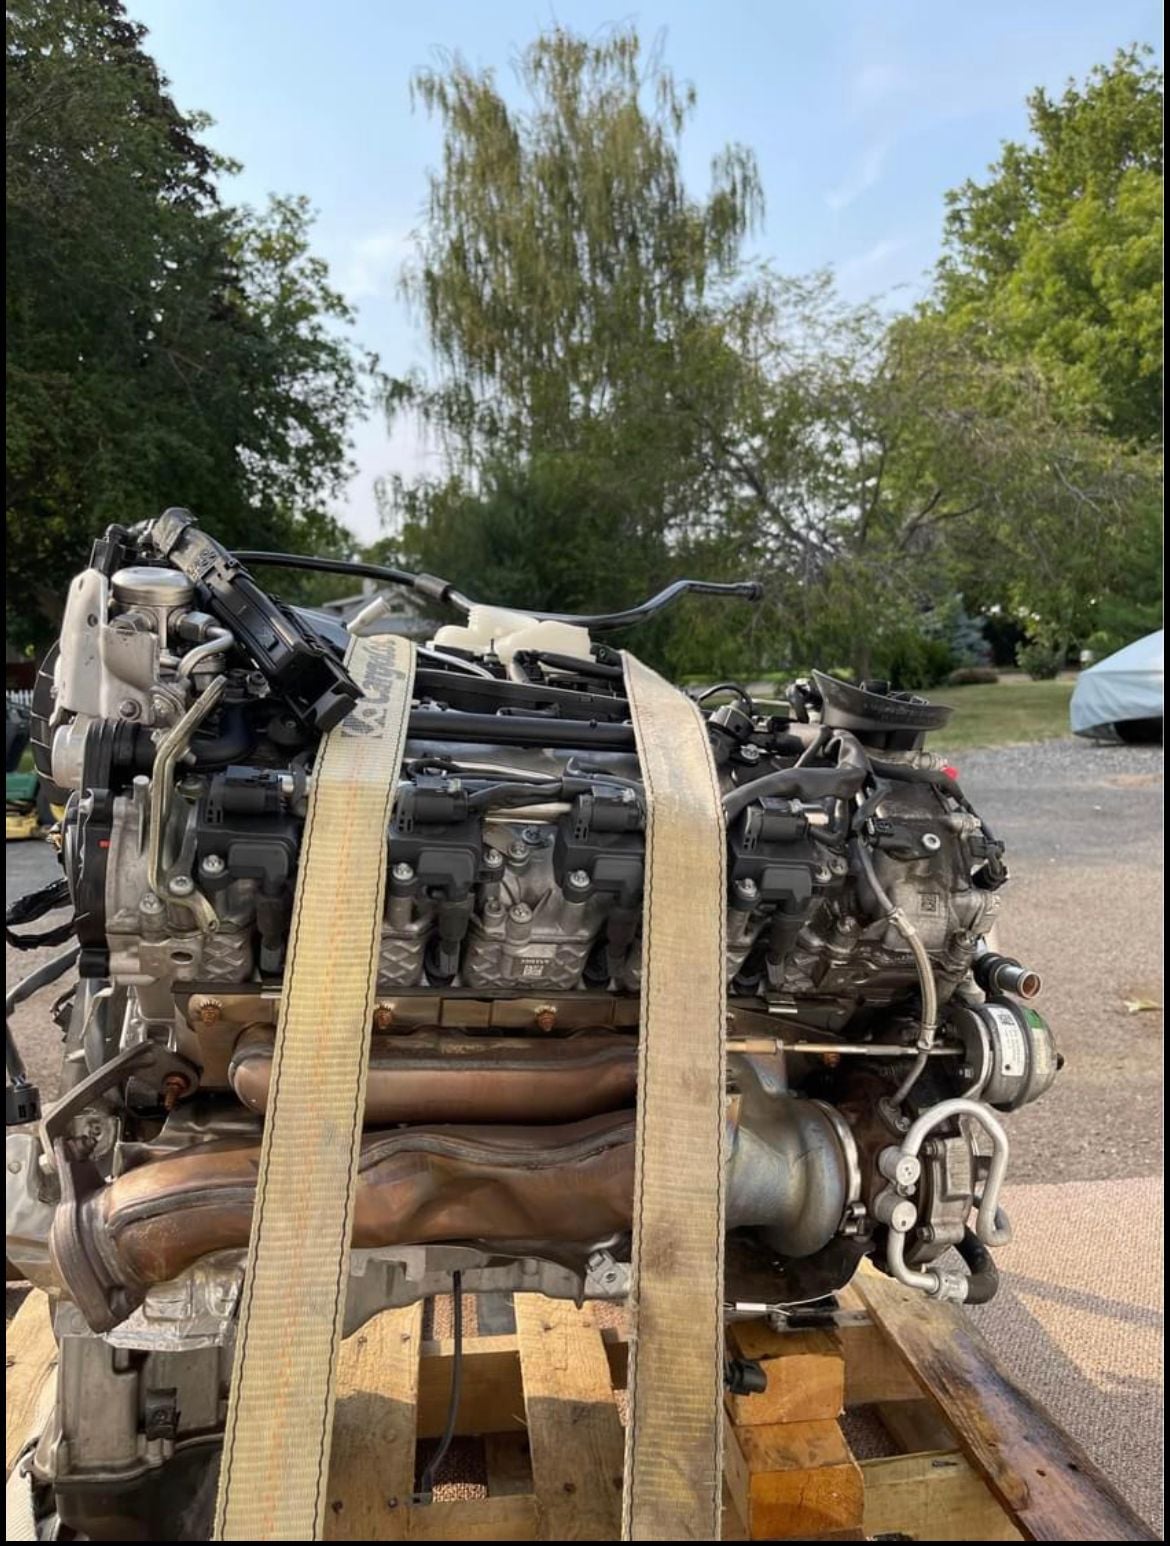 Engine - Complete - V8 Biturbo M278 ENGINE COMPLETE FOR IMMEDIATE SALE-SERIOUS ONLY - Used - 2013 to 2018 Mercedes-Benz GL550 - Toppenish, WA 98948, United States